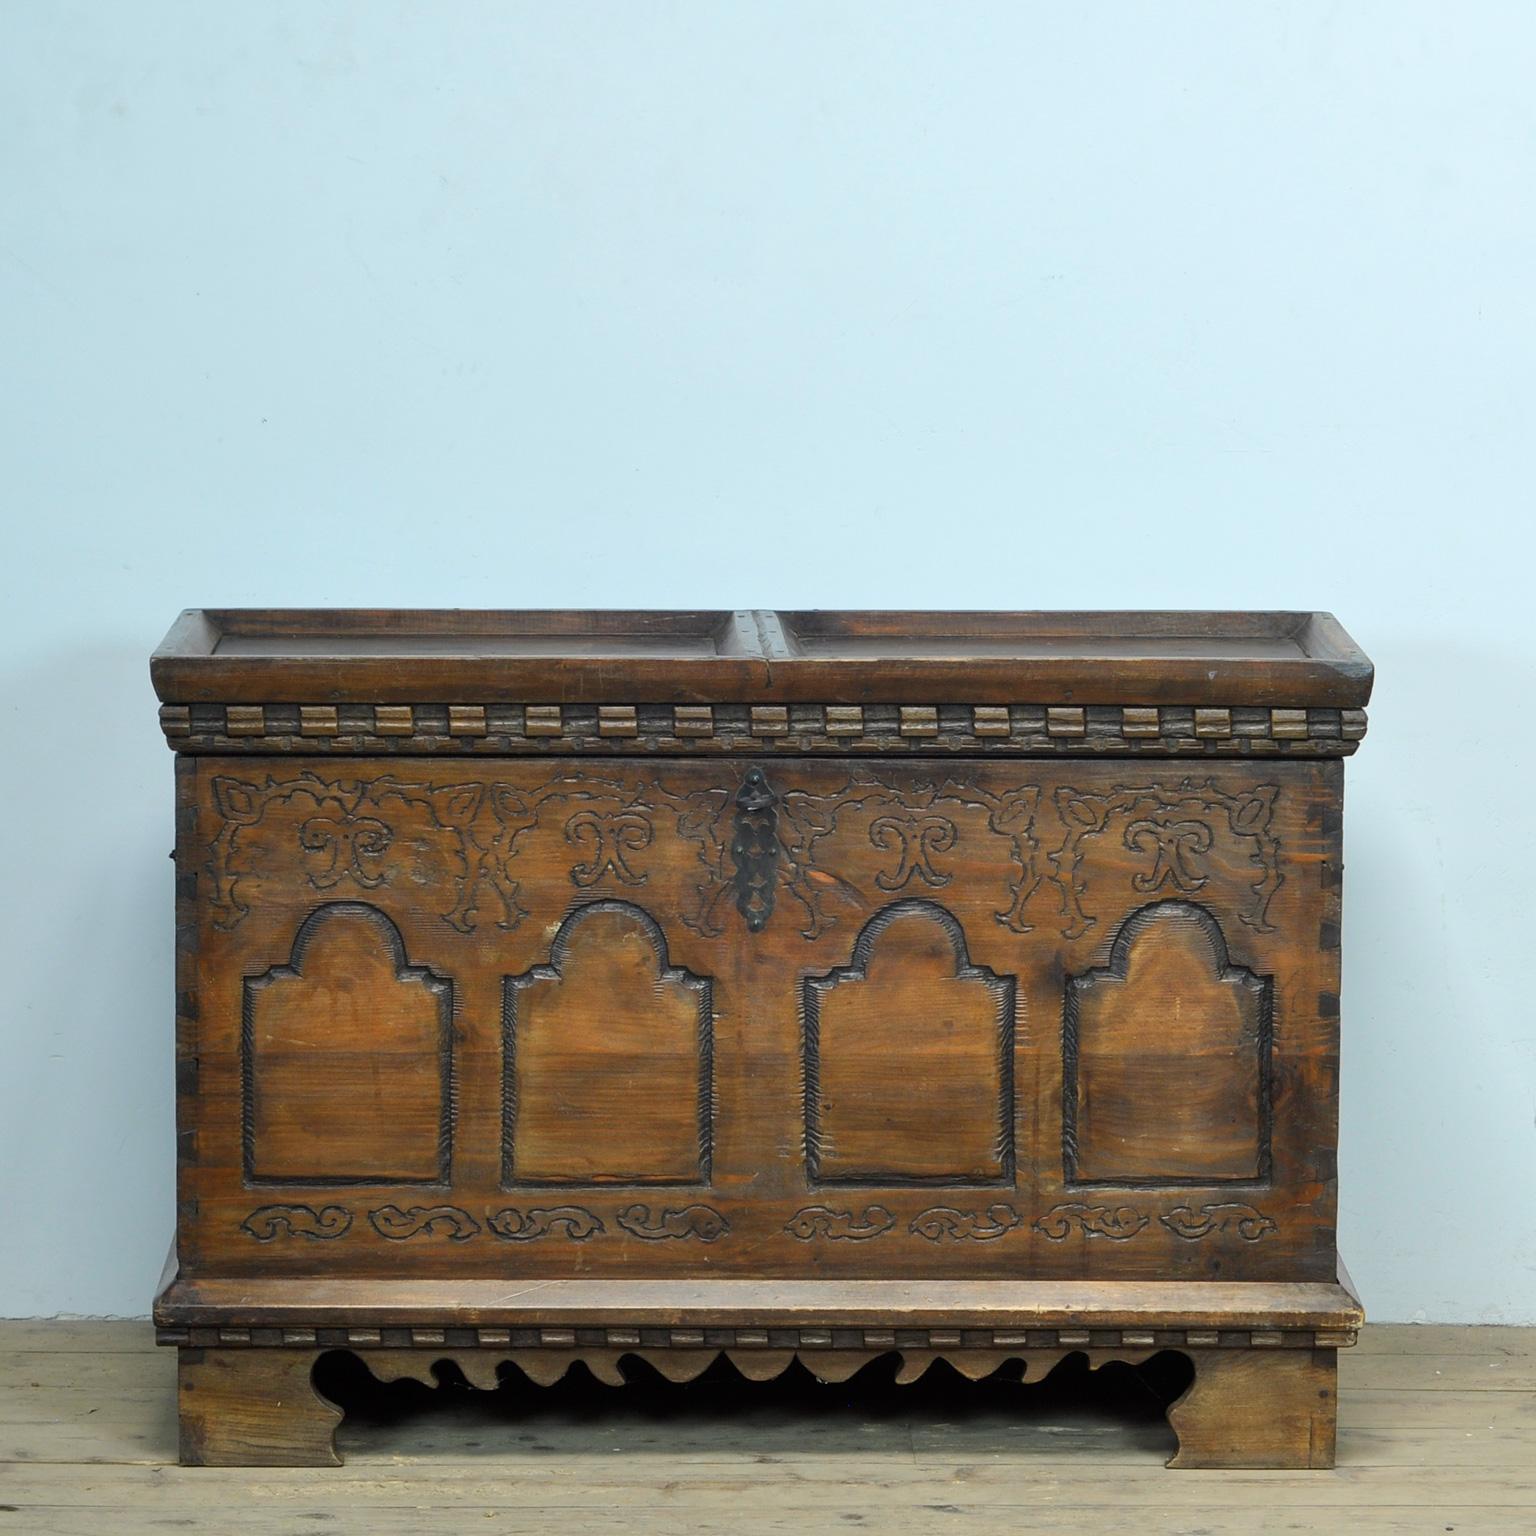 Beautiful antique blanket chest made of pine from around 1880. The antique blanket chest is also completely original and has a lot of charm. Lock and handles are original. The box has a refined carving decoration. The lid has decorative frames. In